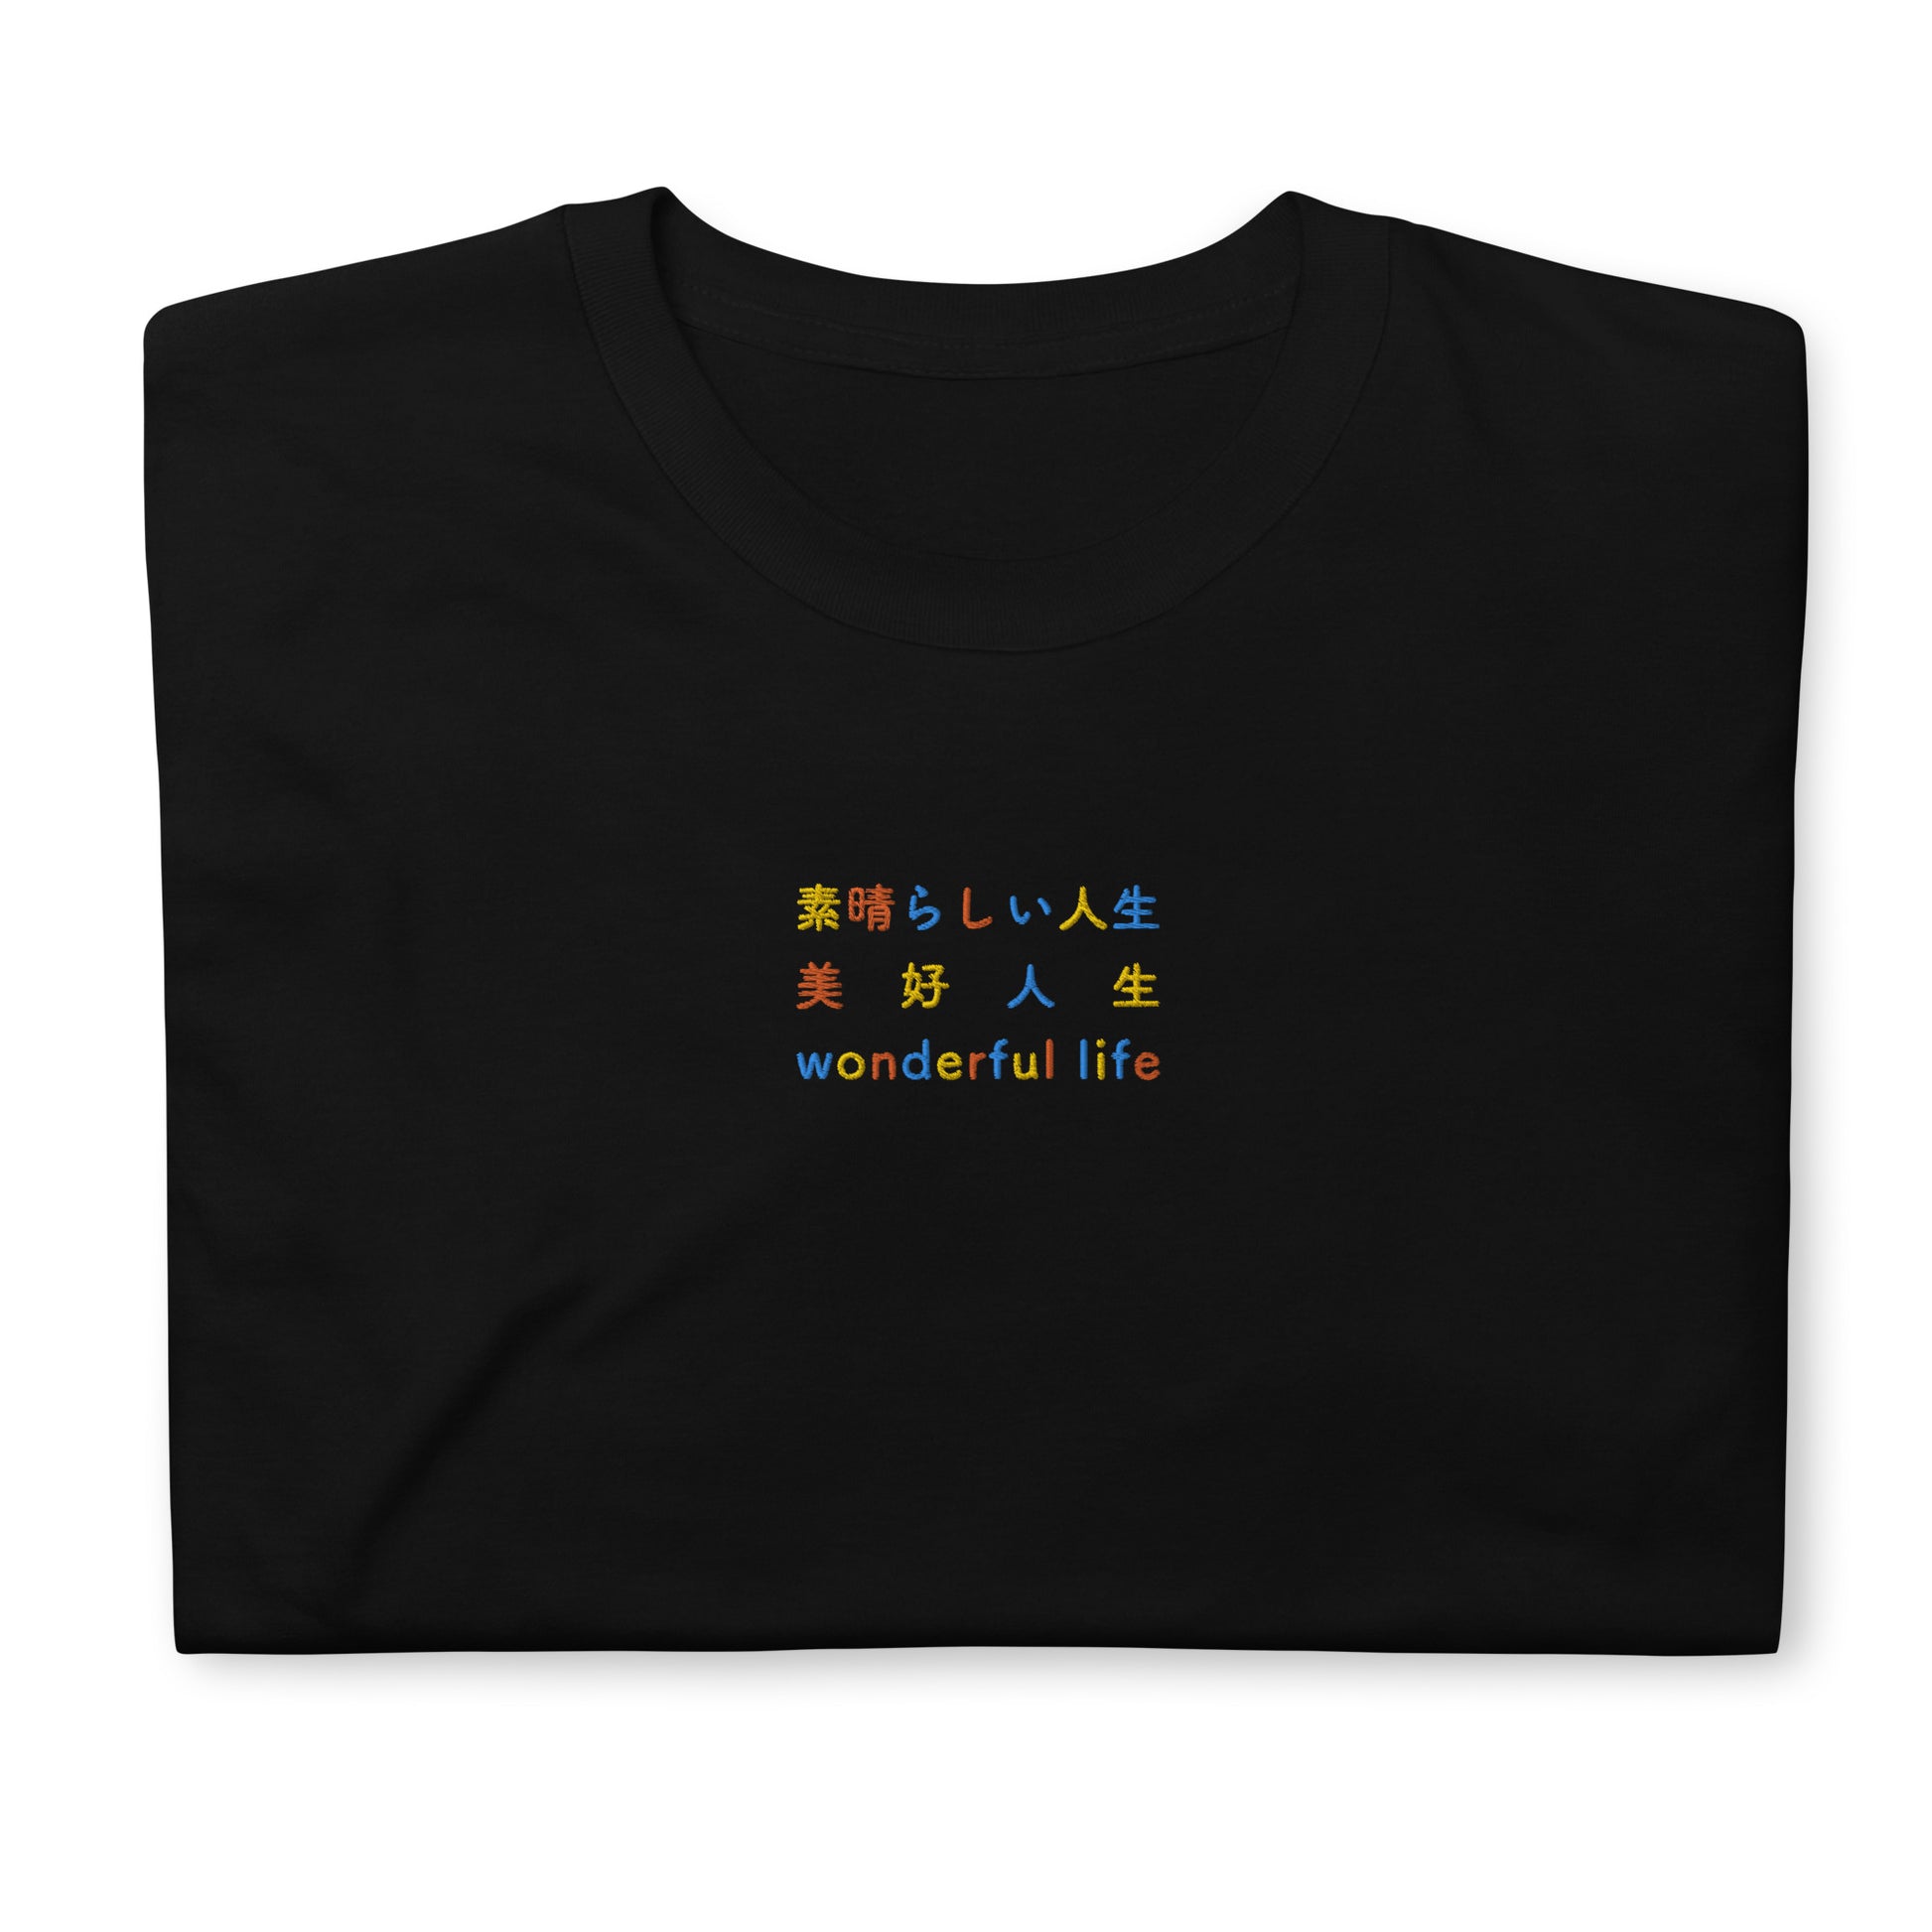 Black High Quality Tee - Front Design with Yellow, Orange and Blue Embroidery "Wonderful Life" in Japanese,Chinese and English